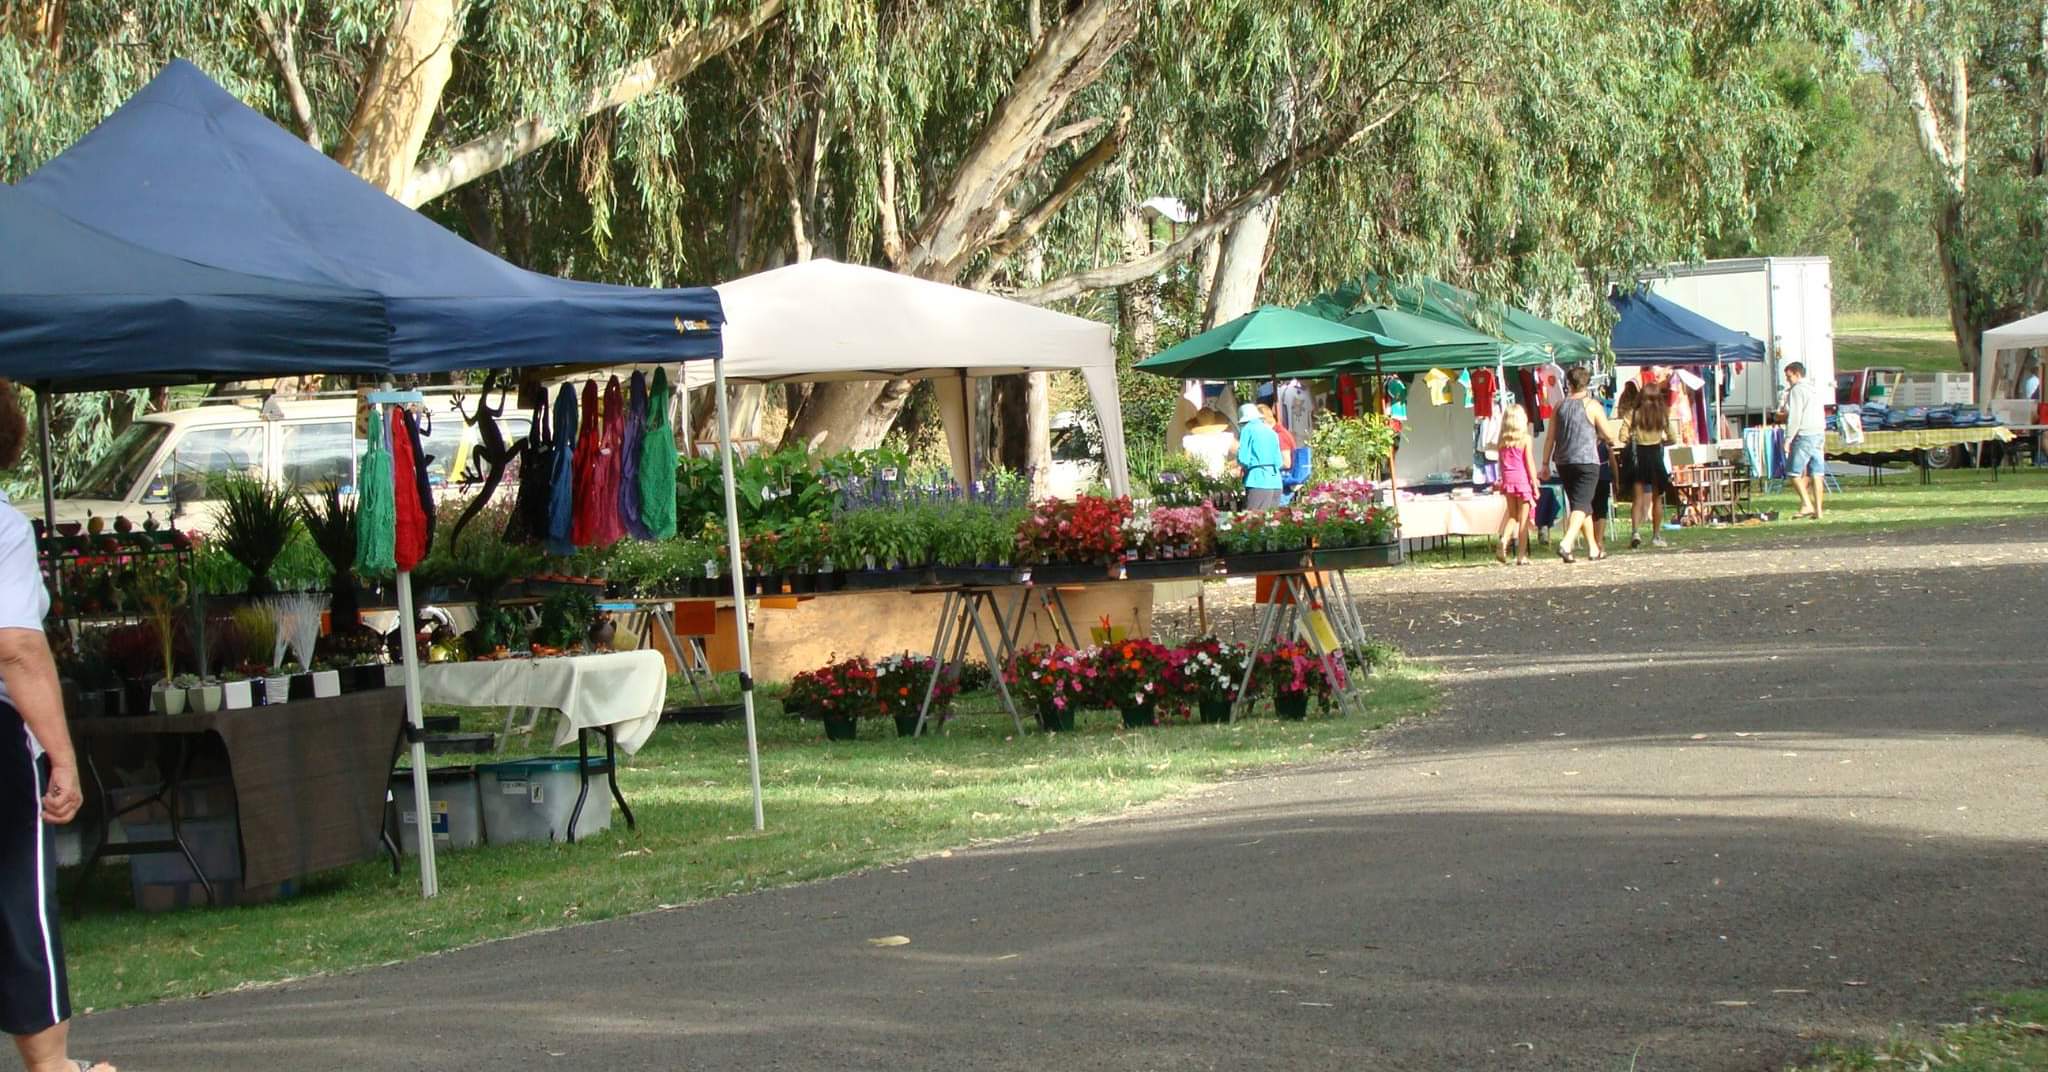 Council to host meet and greet at tomorrow’s community markets